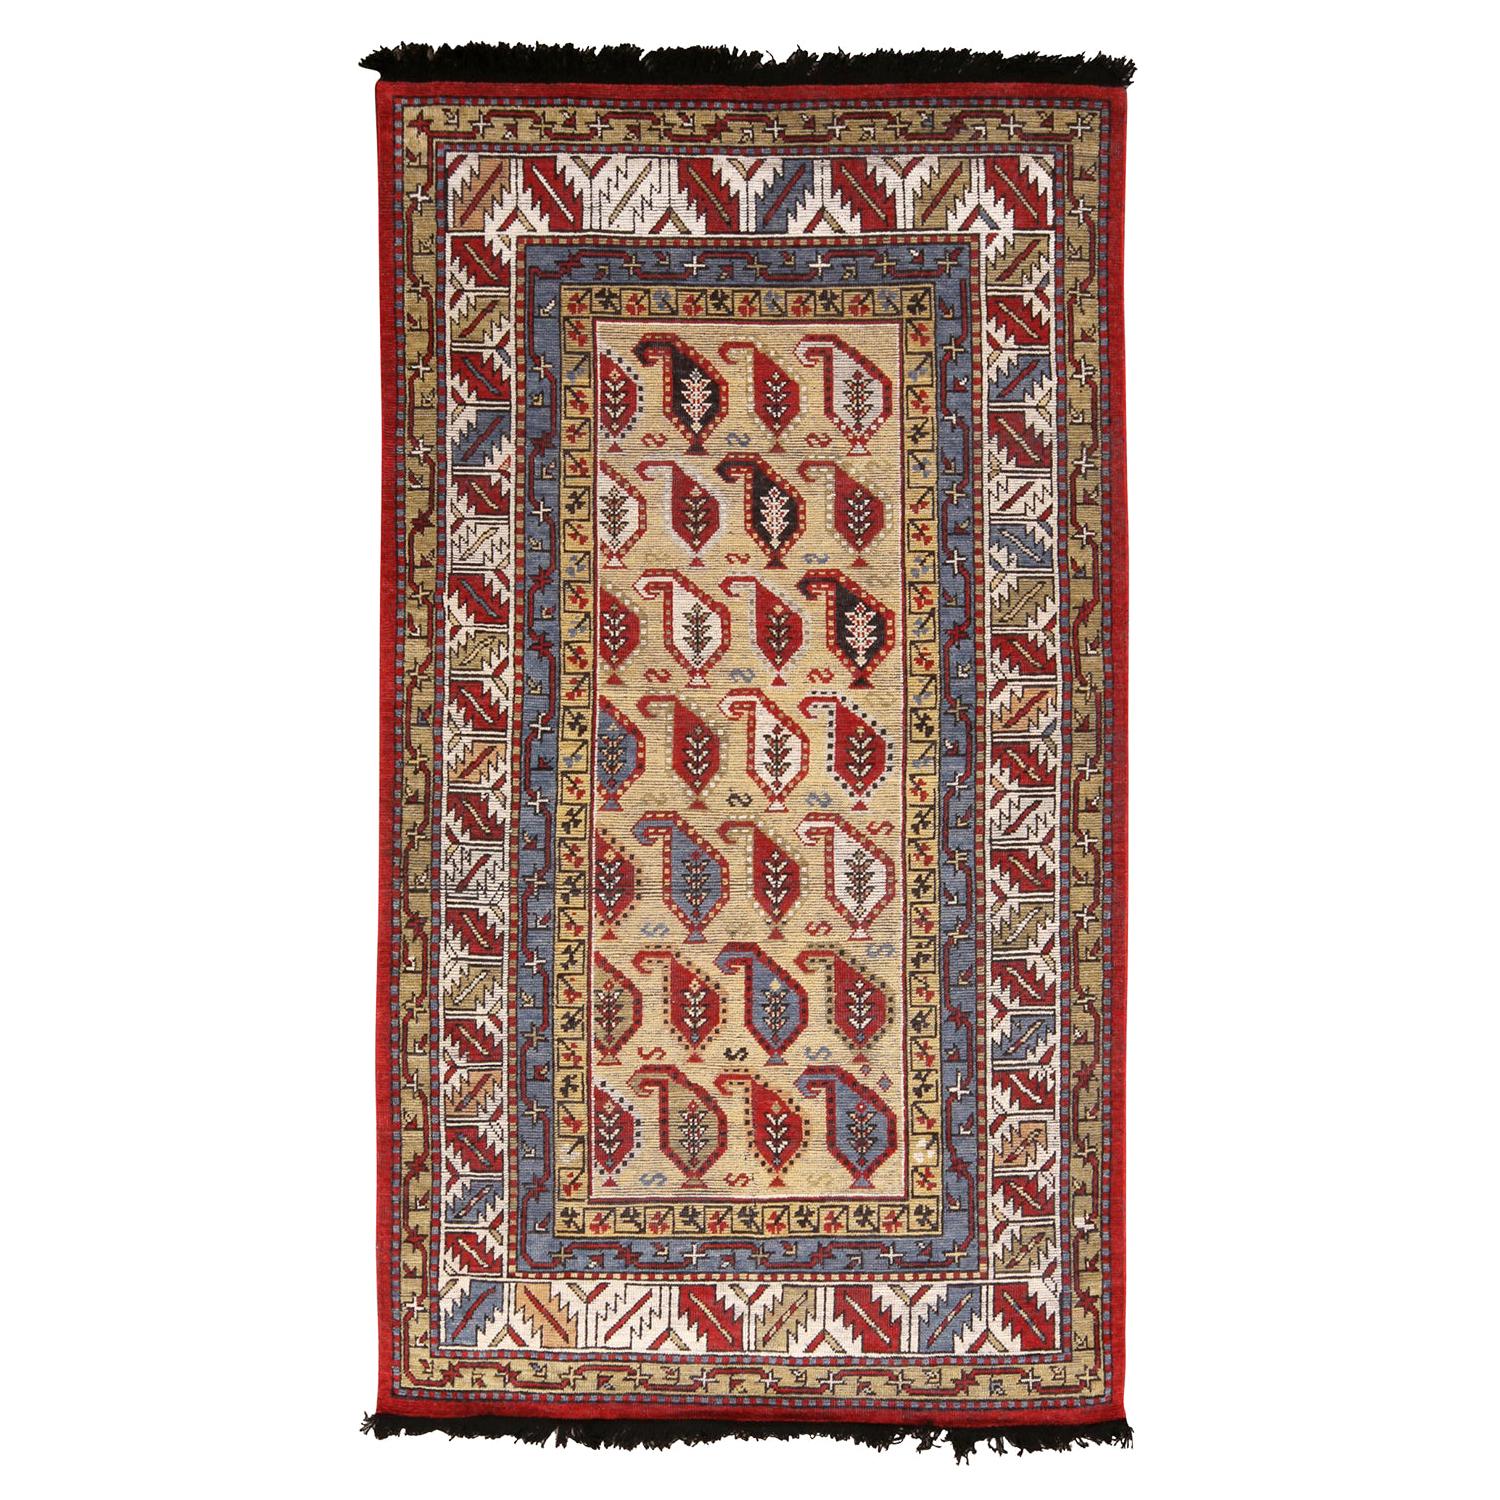 Rug & Kilim's Burano Beige Gold and Red Wool Rug with Boteh Patterns and Blue 